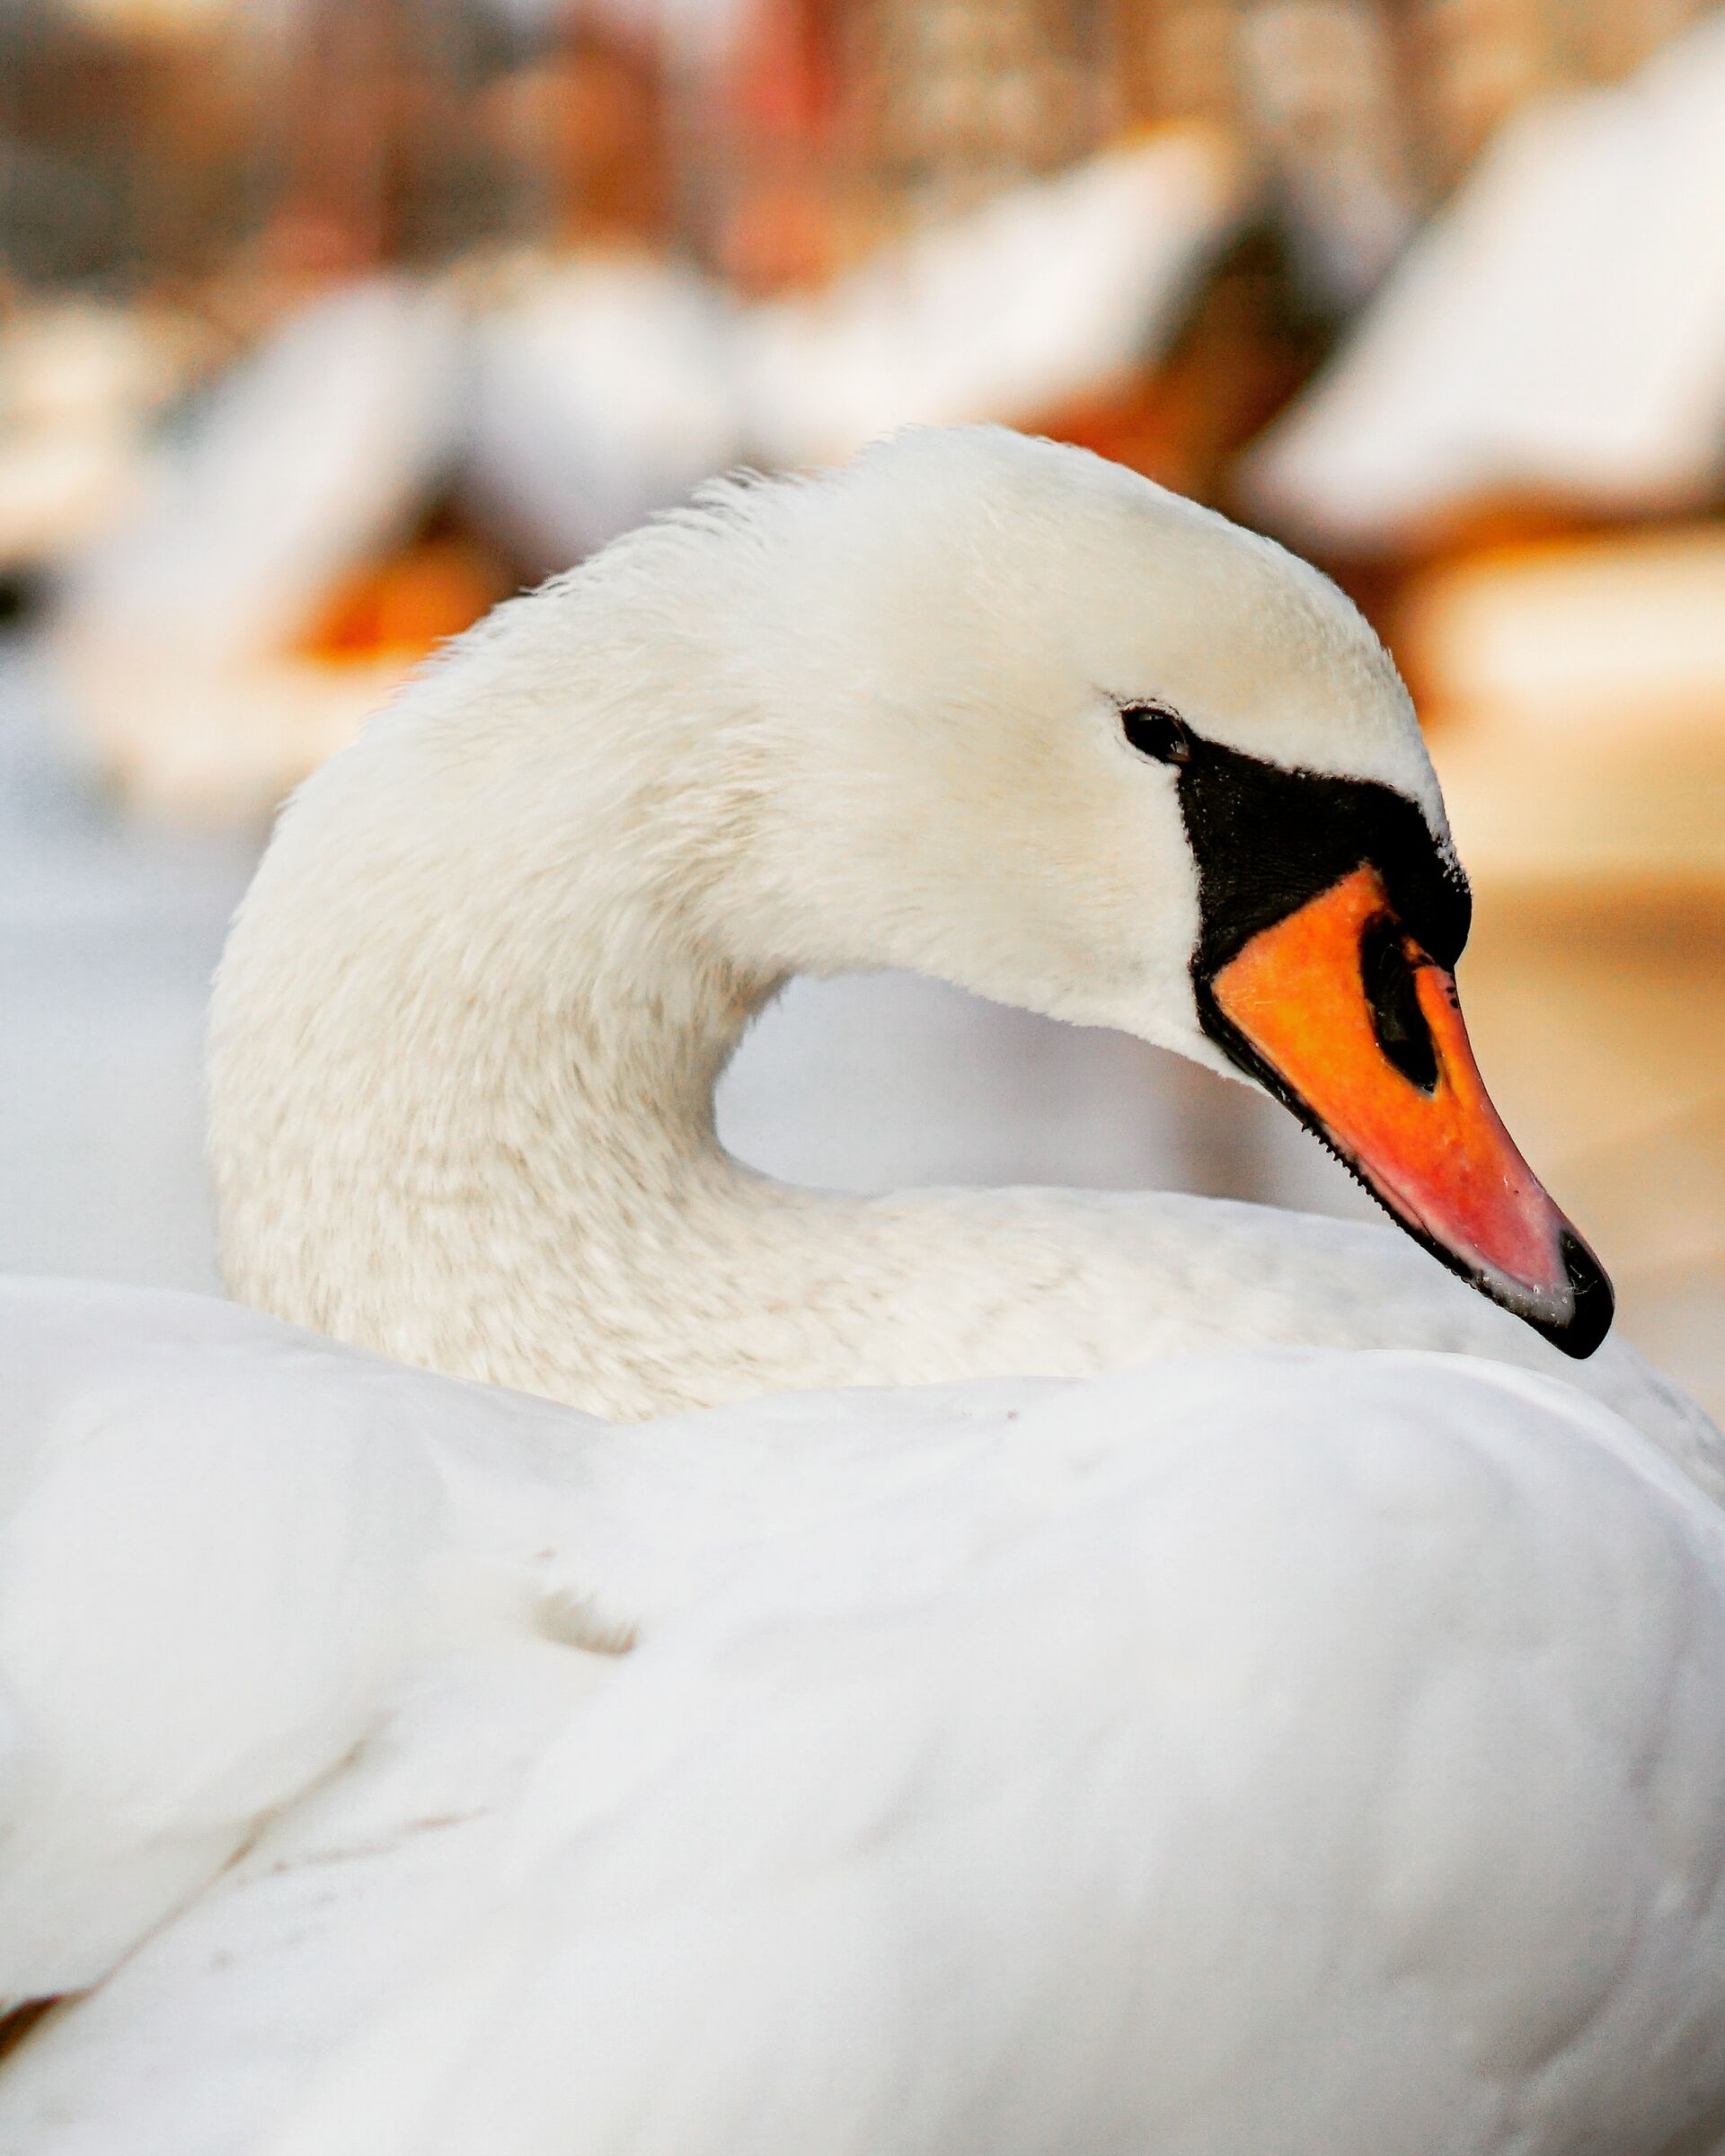 The elegance of the swan...